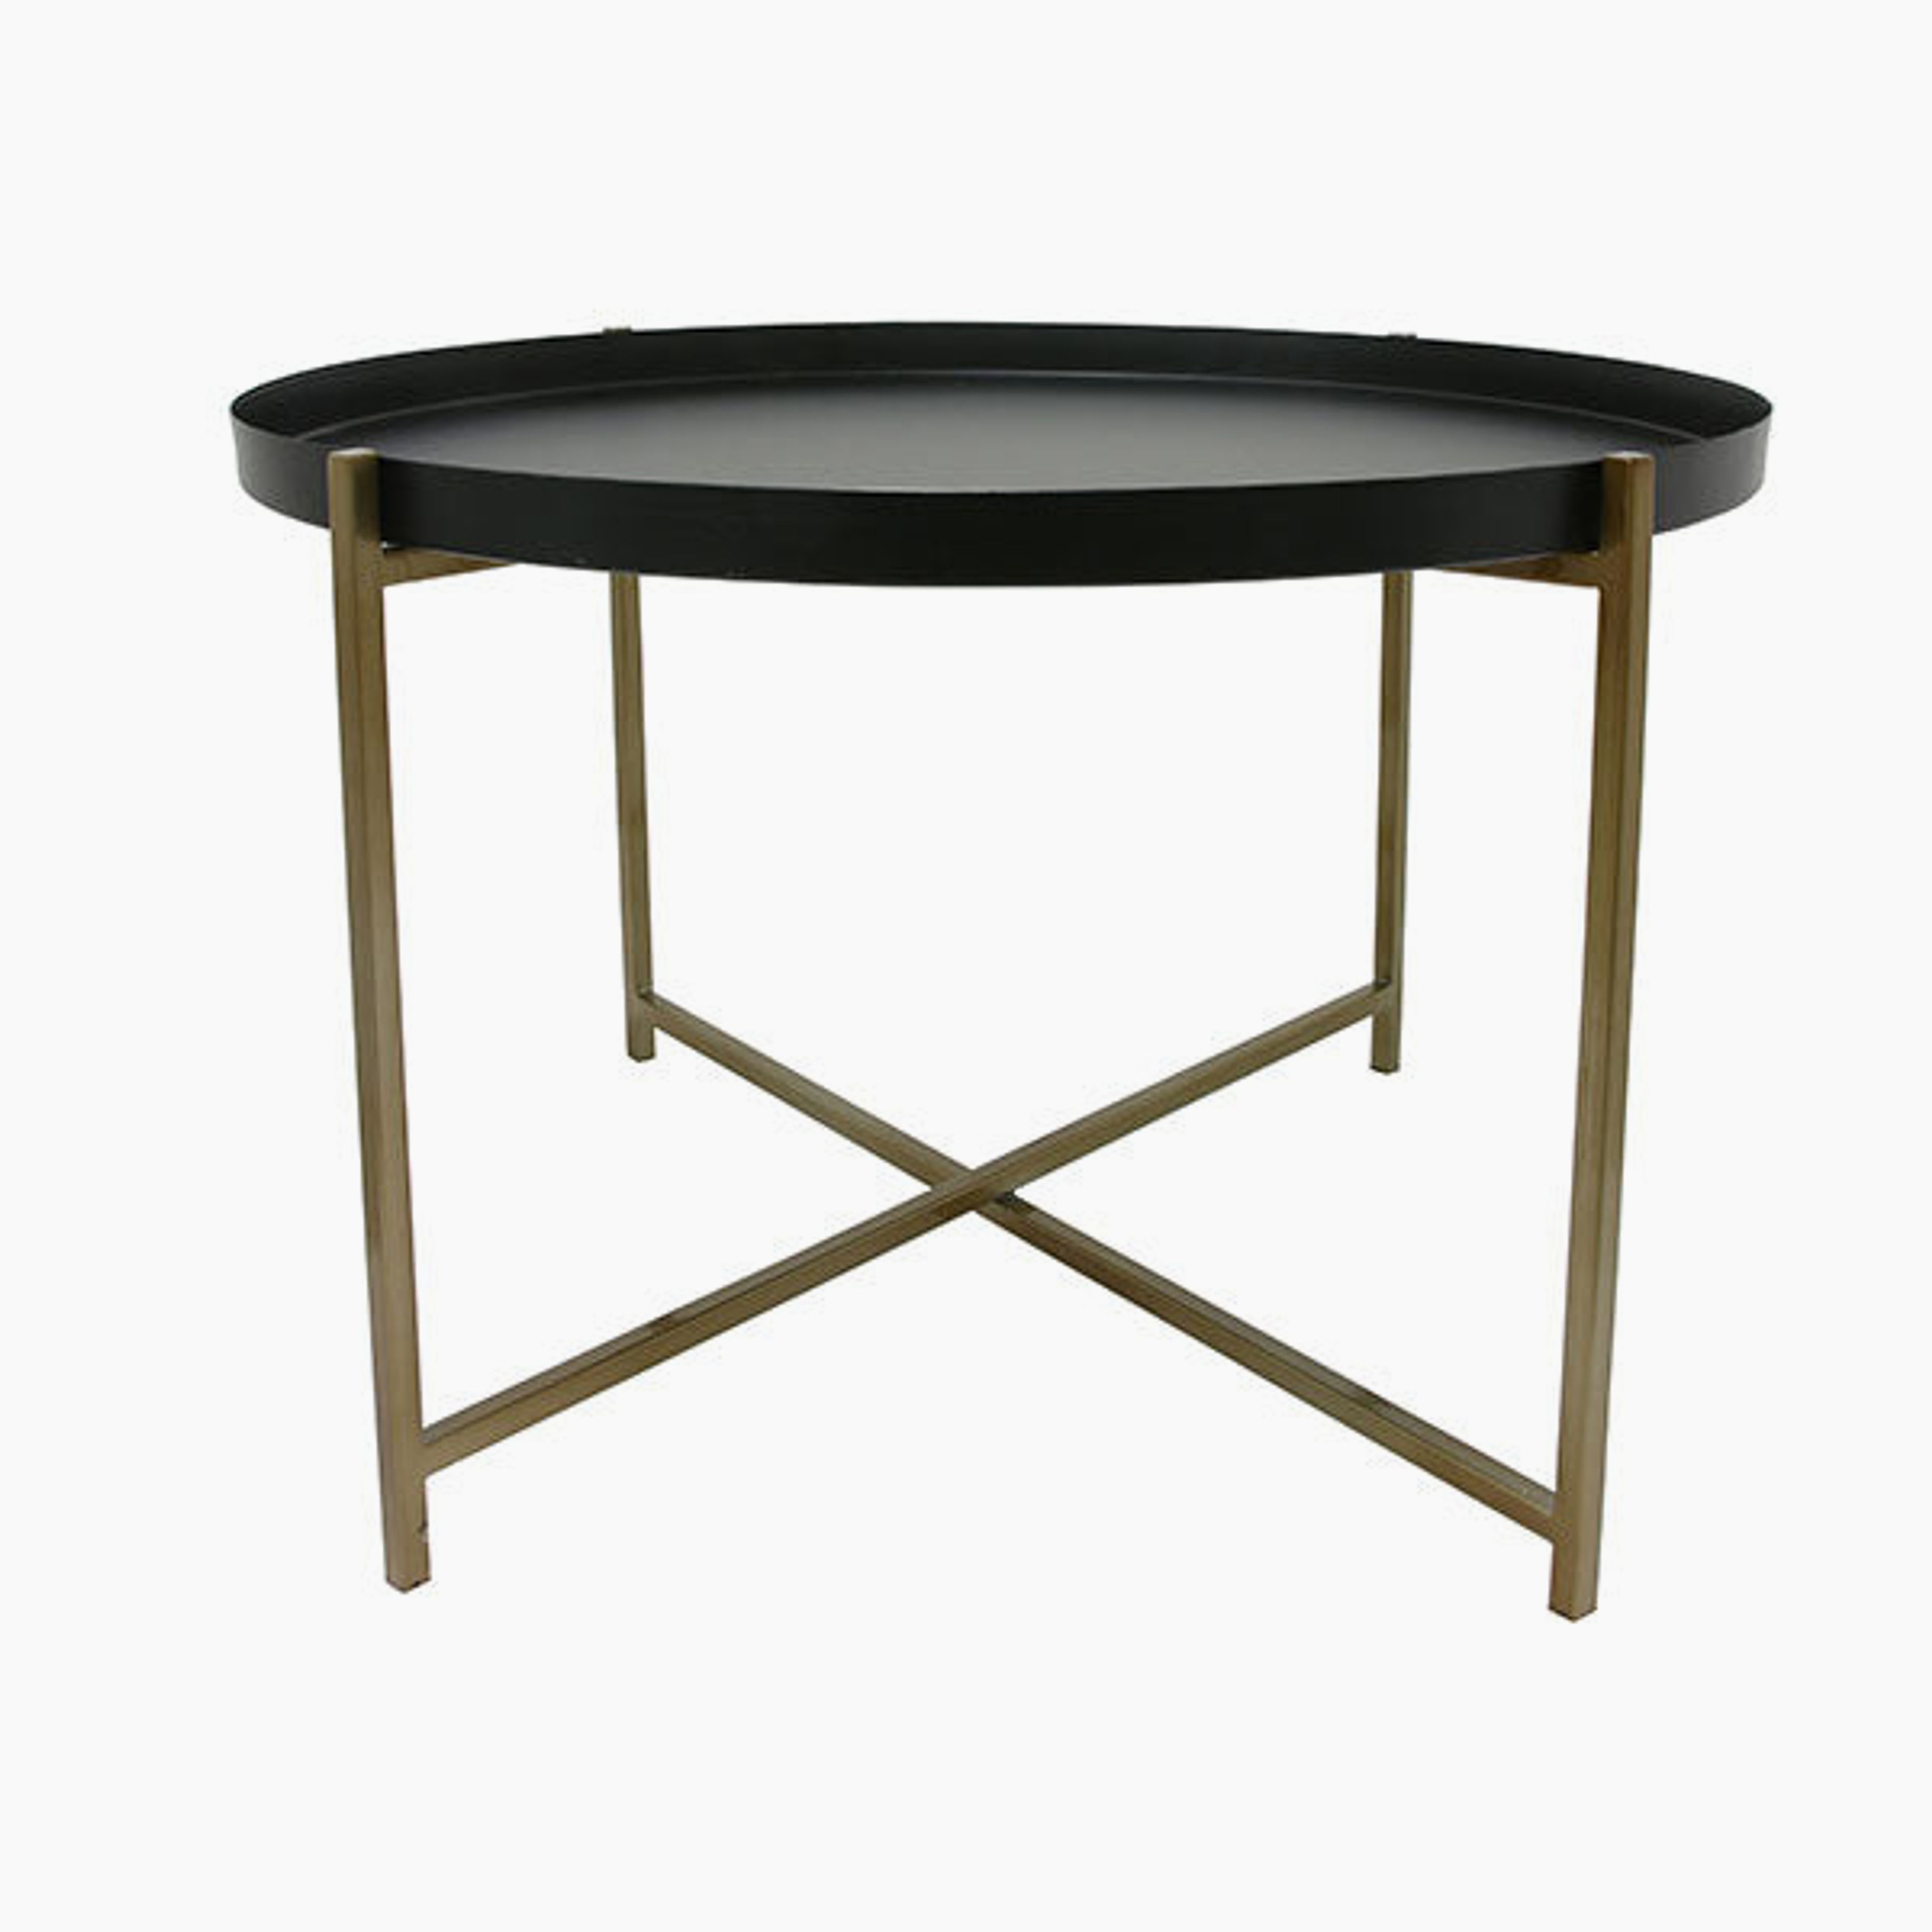 Coffee table - black and brass